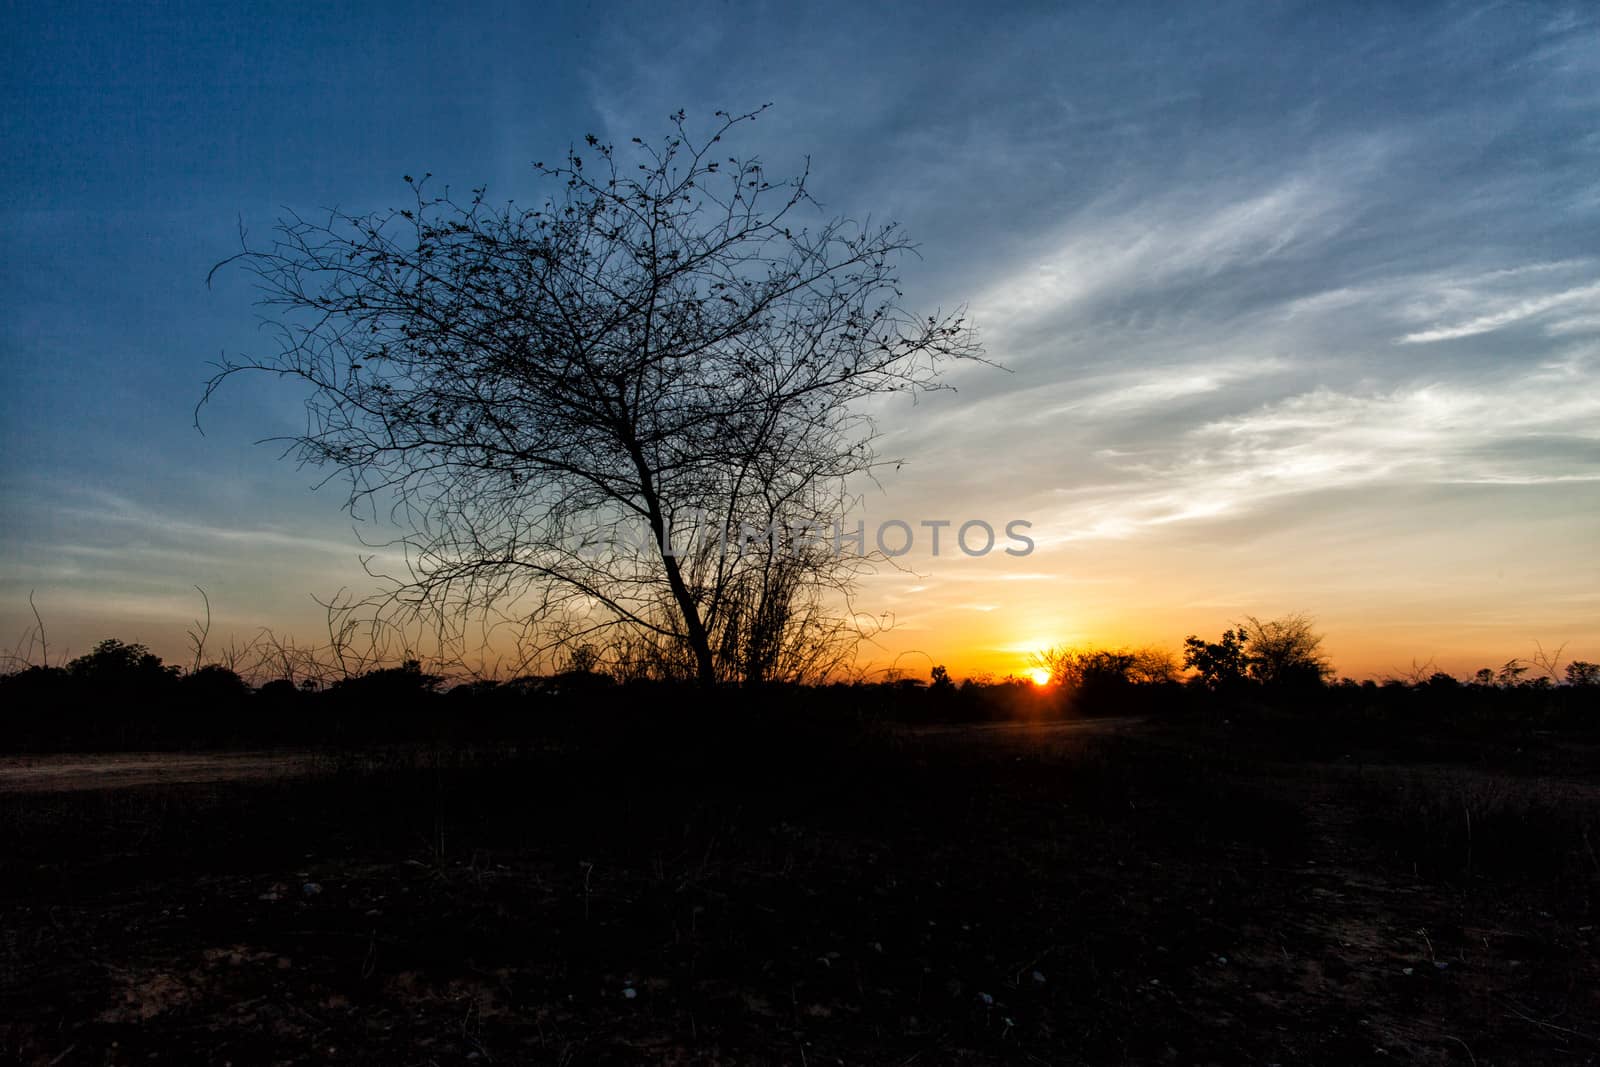 tree in field with sunset by moggara12